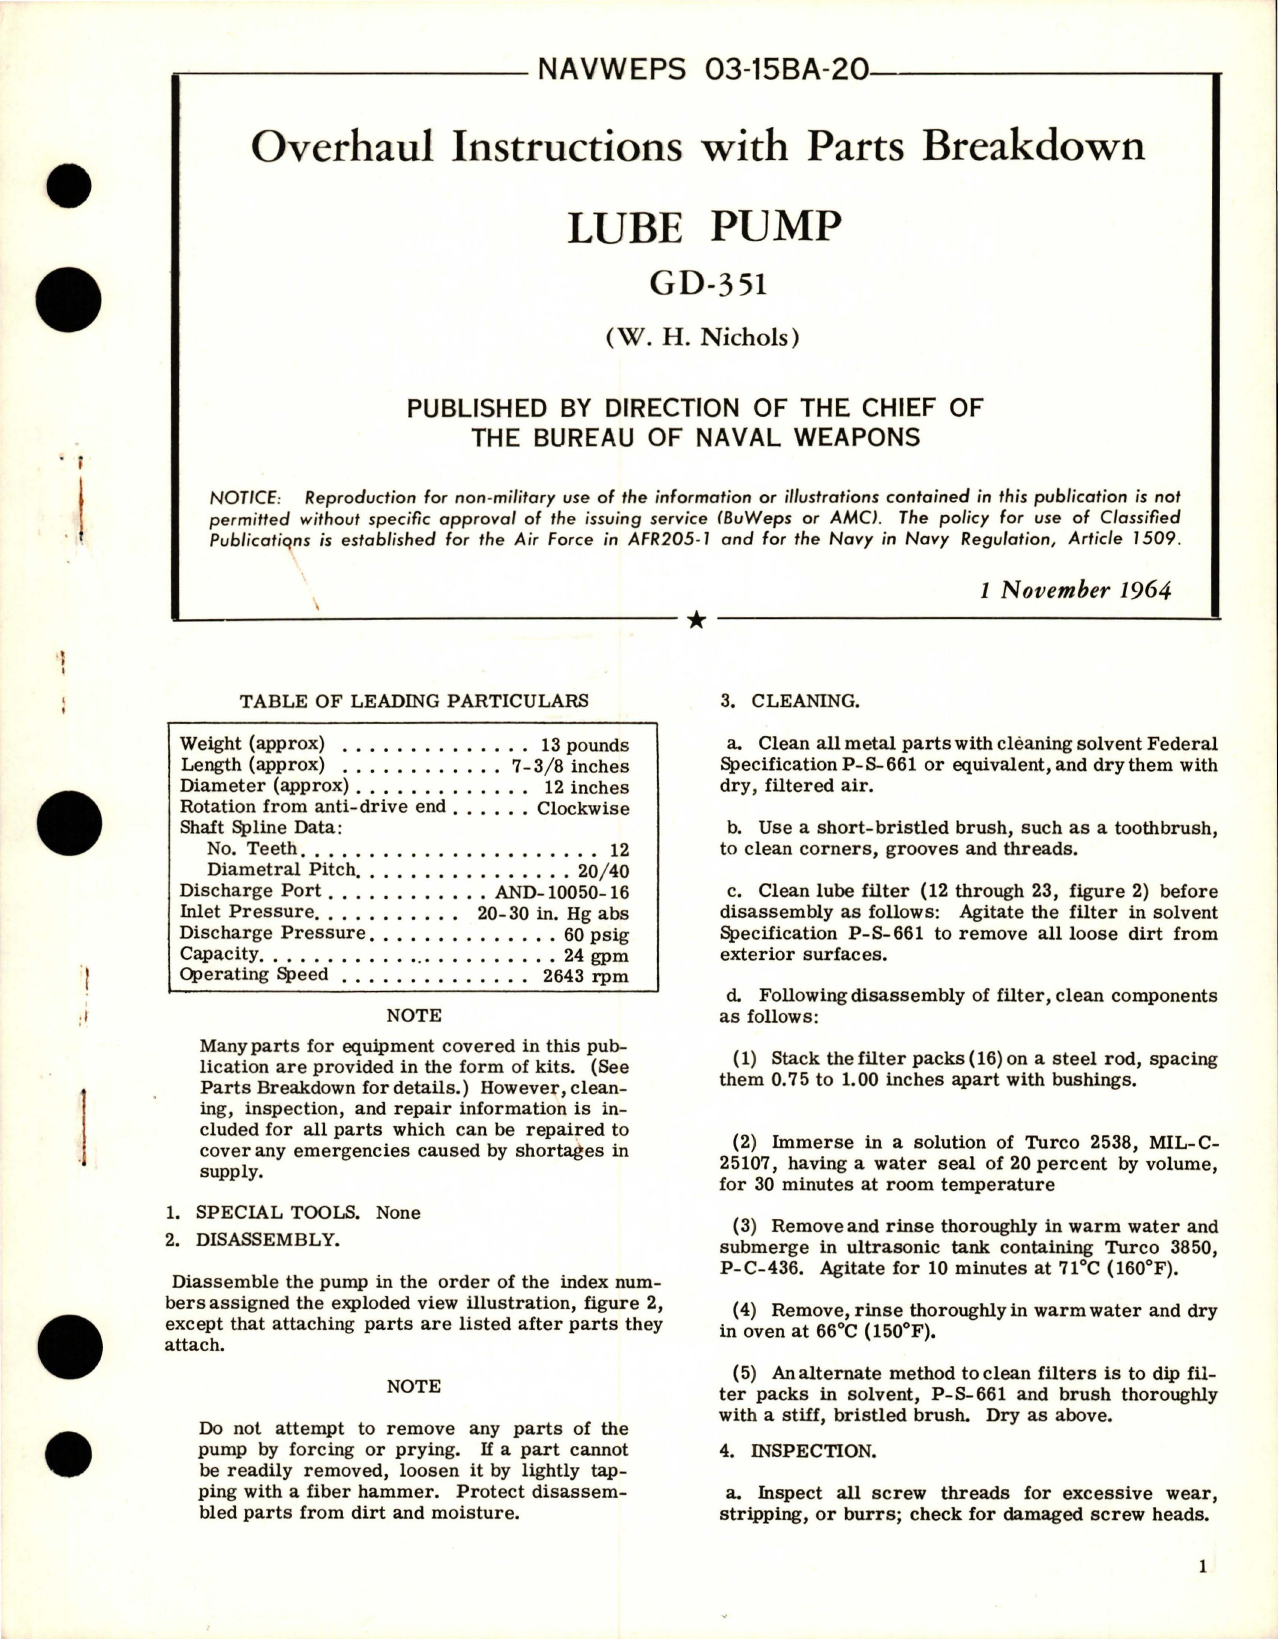 Sample page 1 from AirCorps Library document: Overhaul Instructions with Parts Breakdown for Lube Pump - GD-351